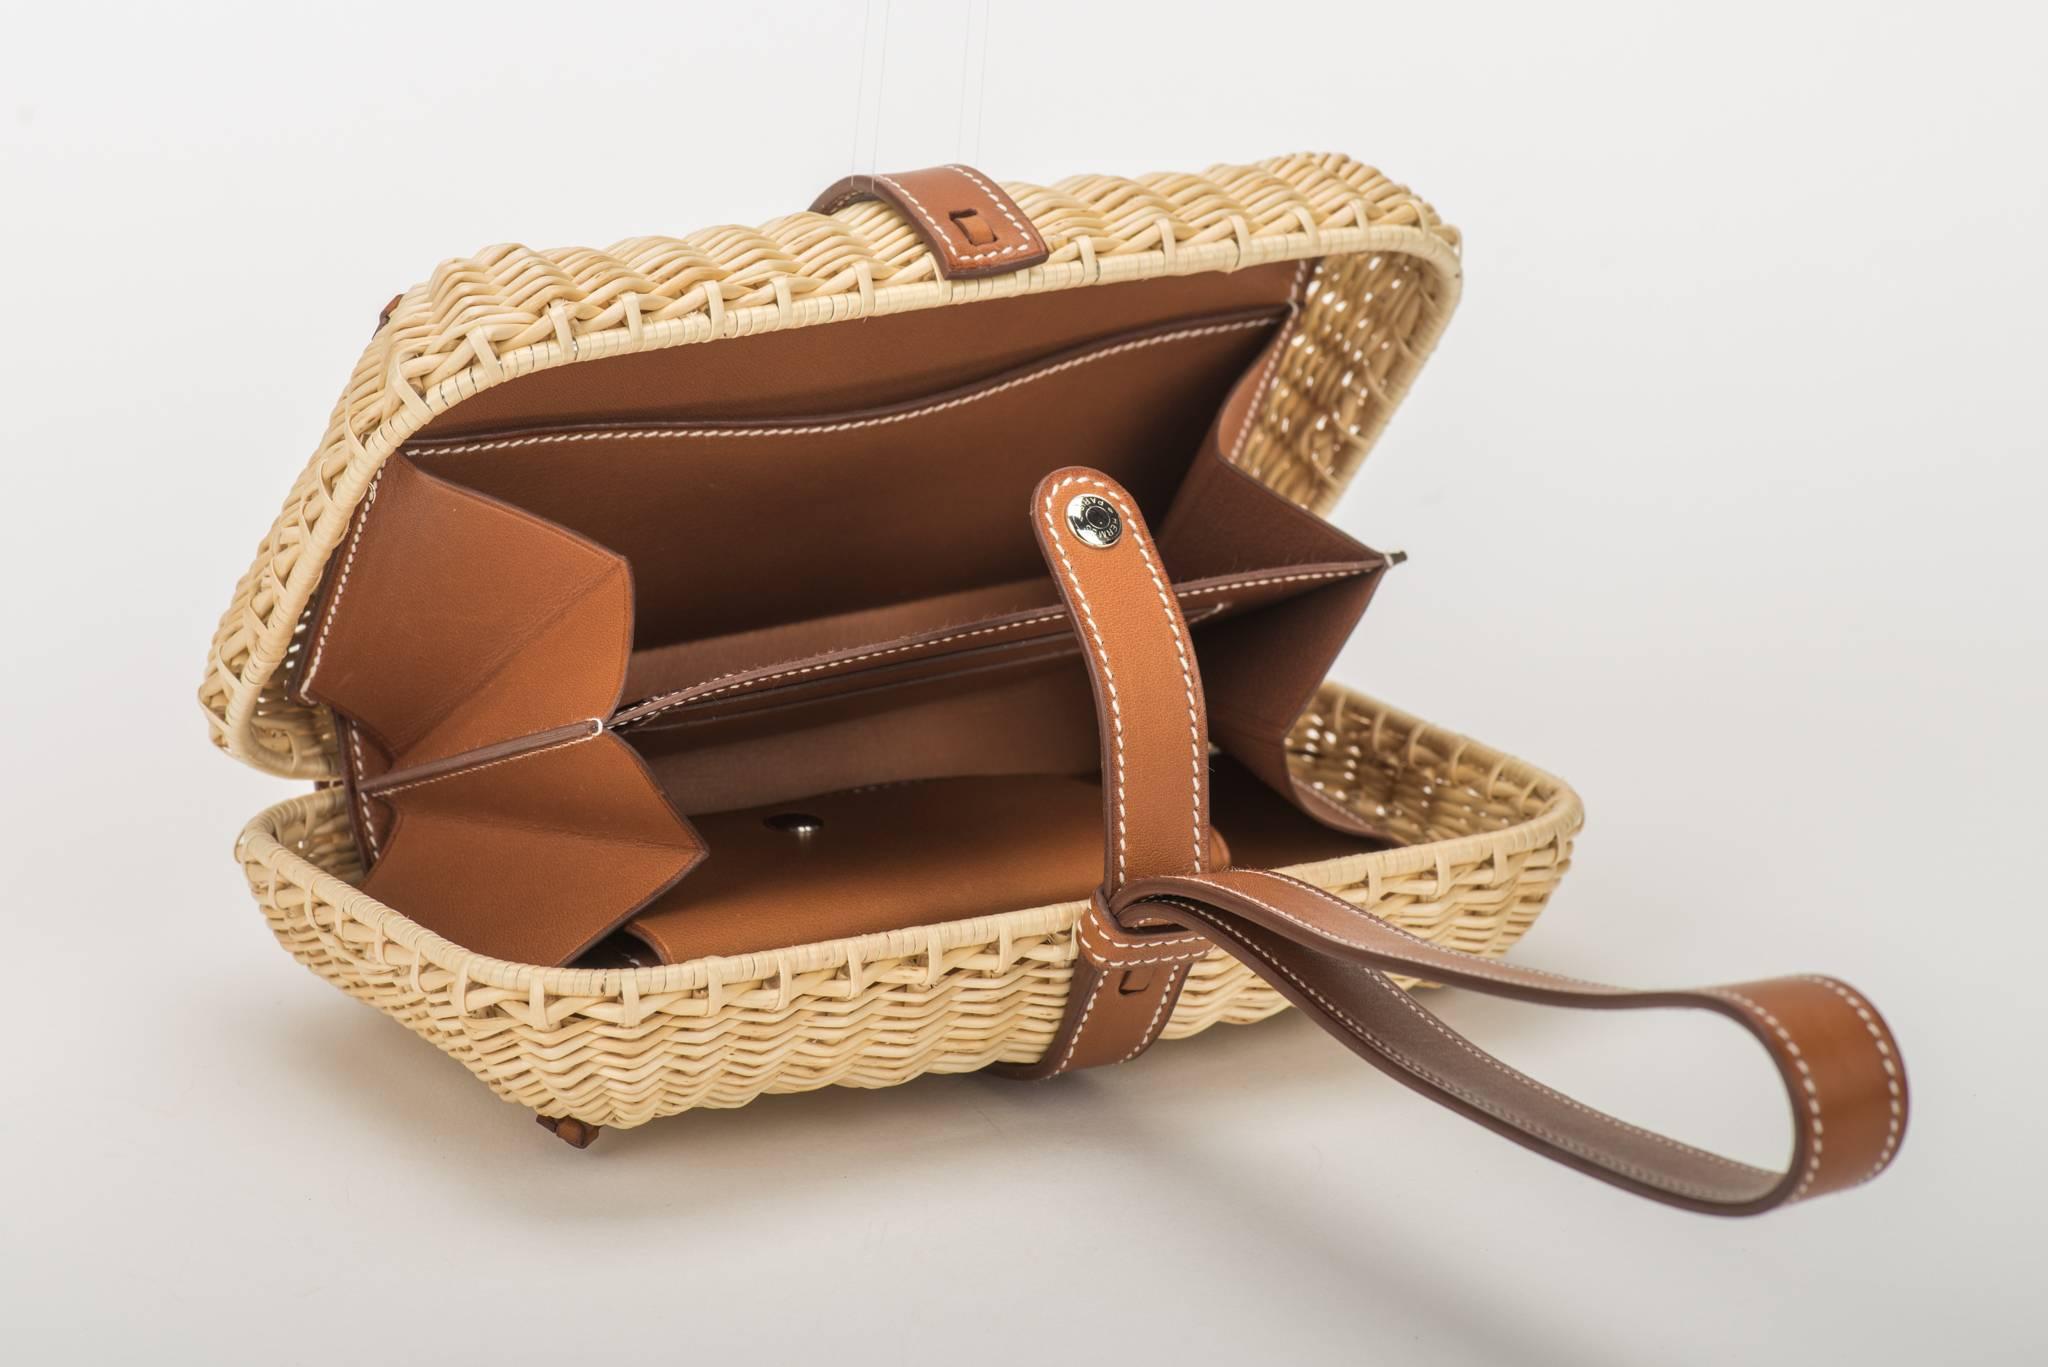 New in box natural woven wicker Hermès Picnic clutch with palladium hardware and barenia leather trim, single flat shoulder strap, tonal leather lining, dual interior compartments, dual slit pockets at interior walls, four card slots and snap